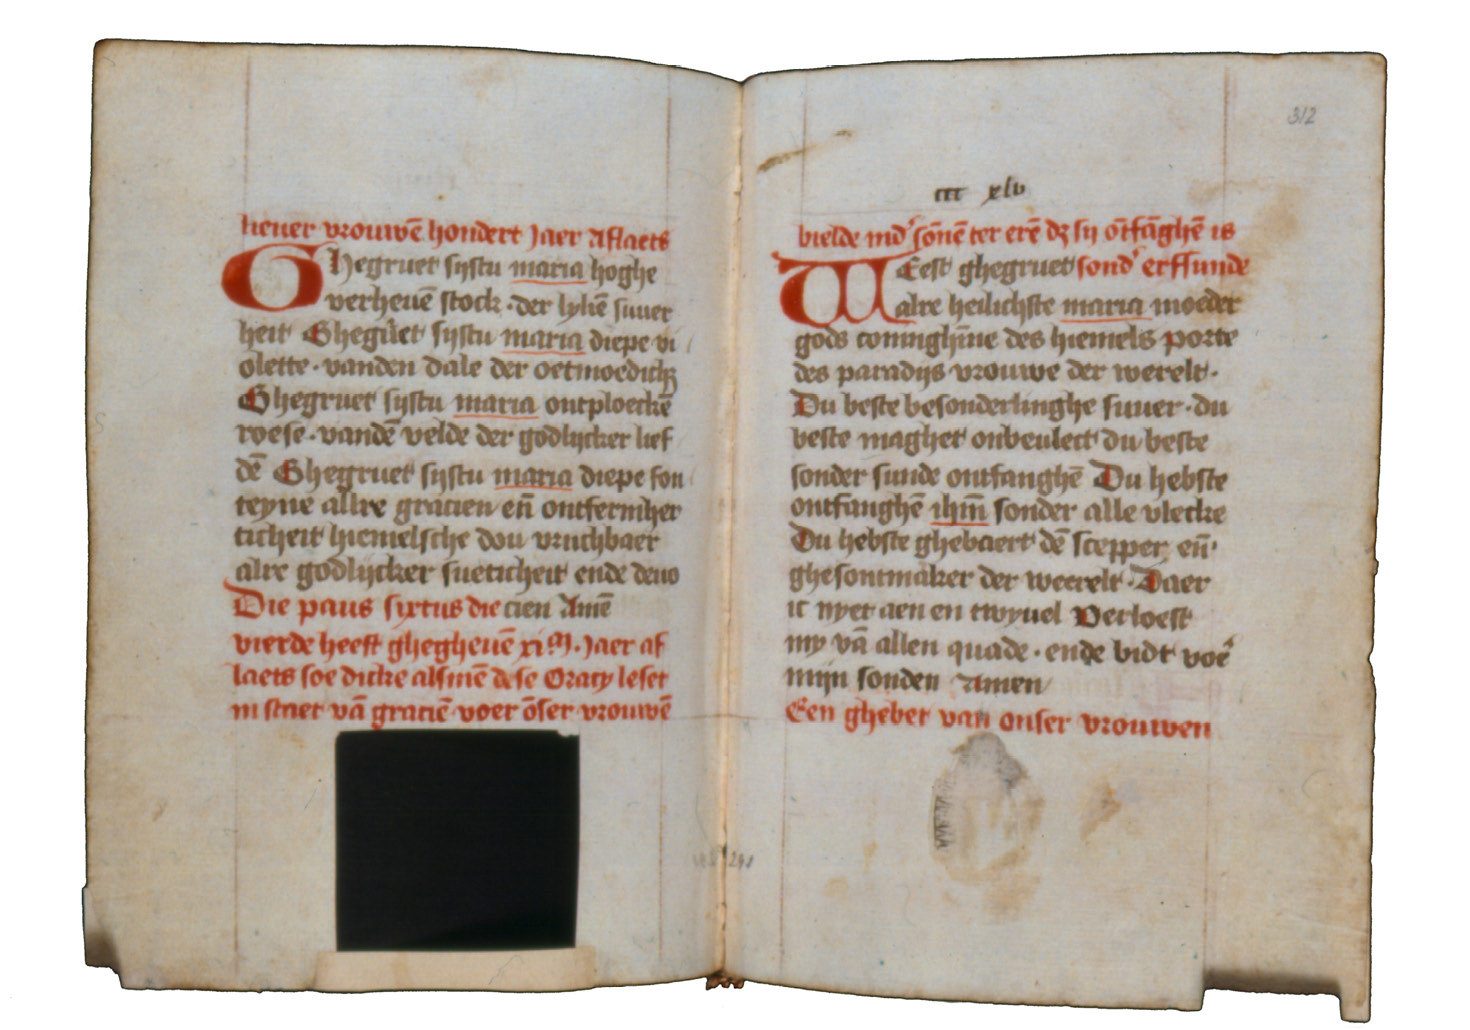 Fig. 3  Opening from the beghards’ book of hours, Maastricht, c. 1500. London, British Library, Add. Ms. 24332, fols 311v–312r (modern foliation) or ccc xlv (original foliation).